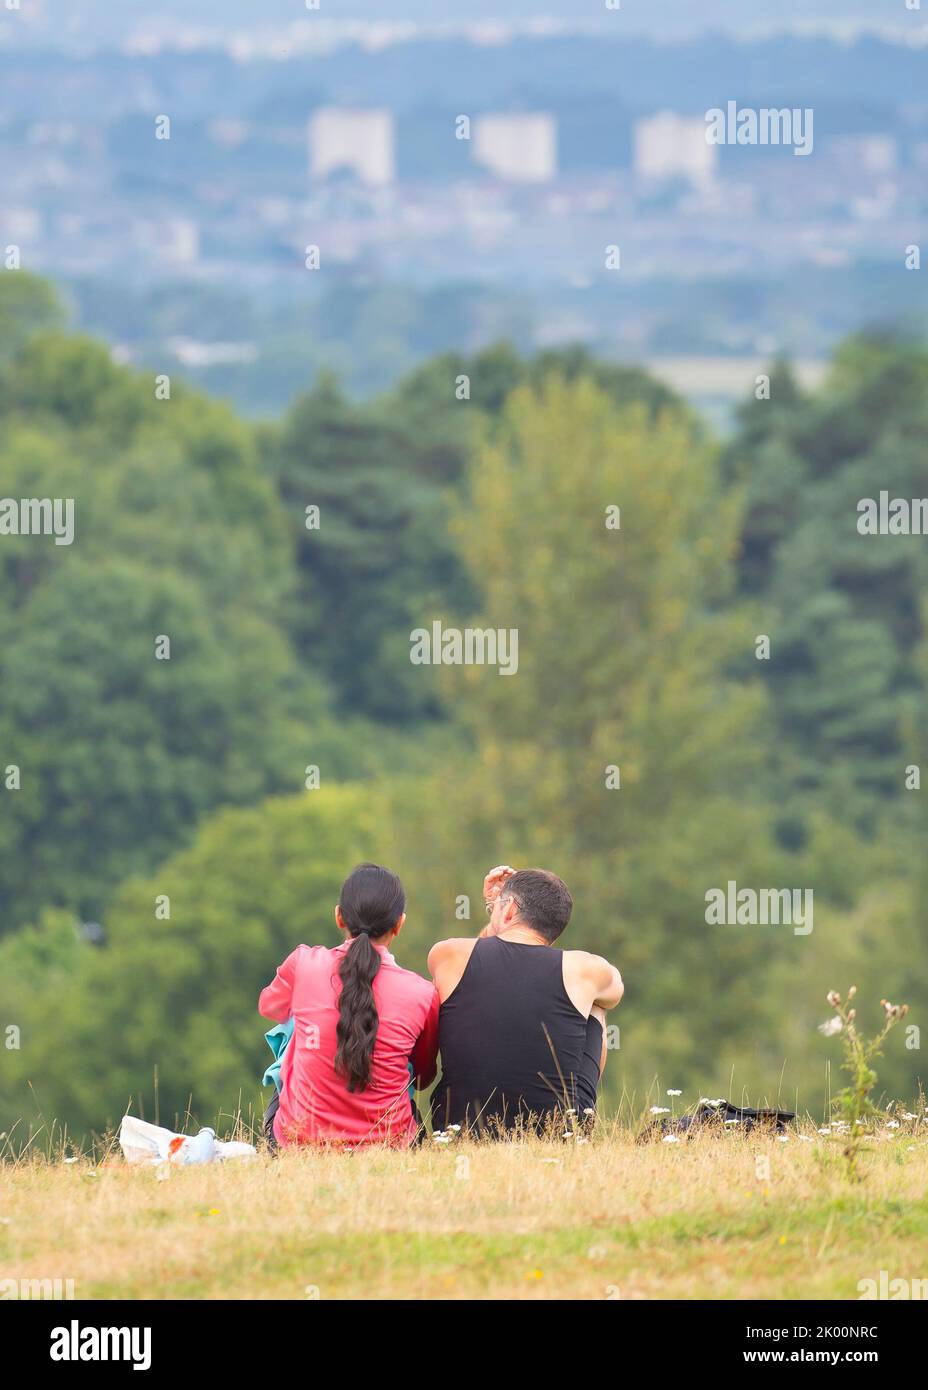 Rear/back view of man and woman sitting isolated together on rural UK hillside looking at the view of Birmingham city in the distance. Stock Photo